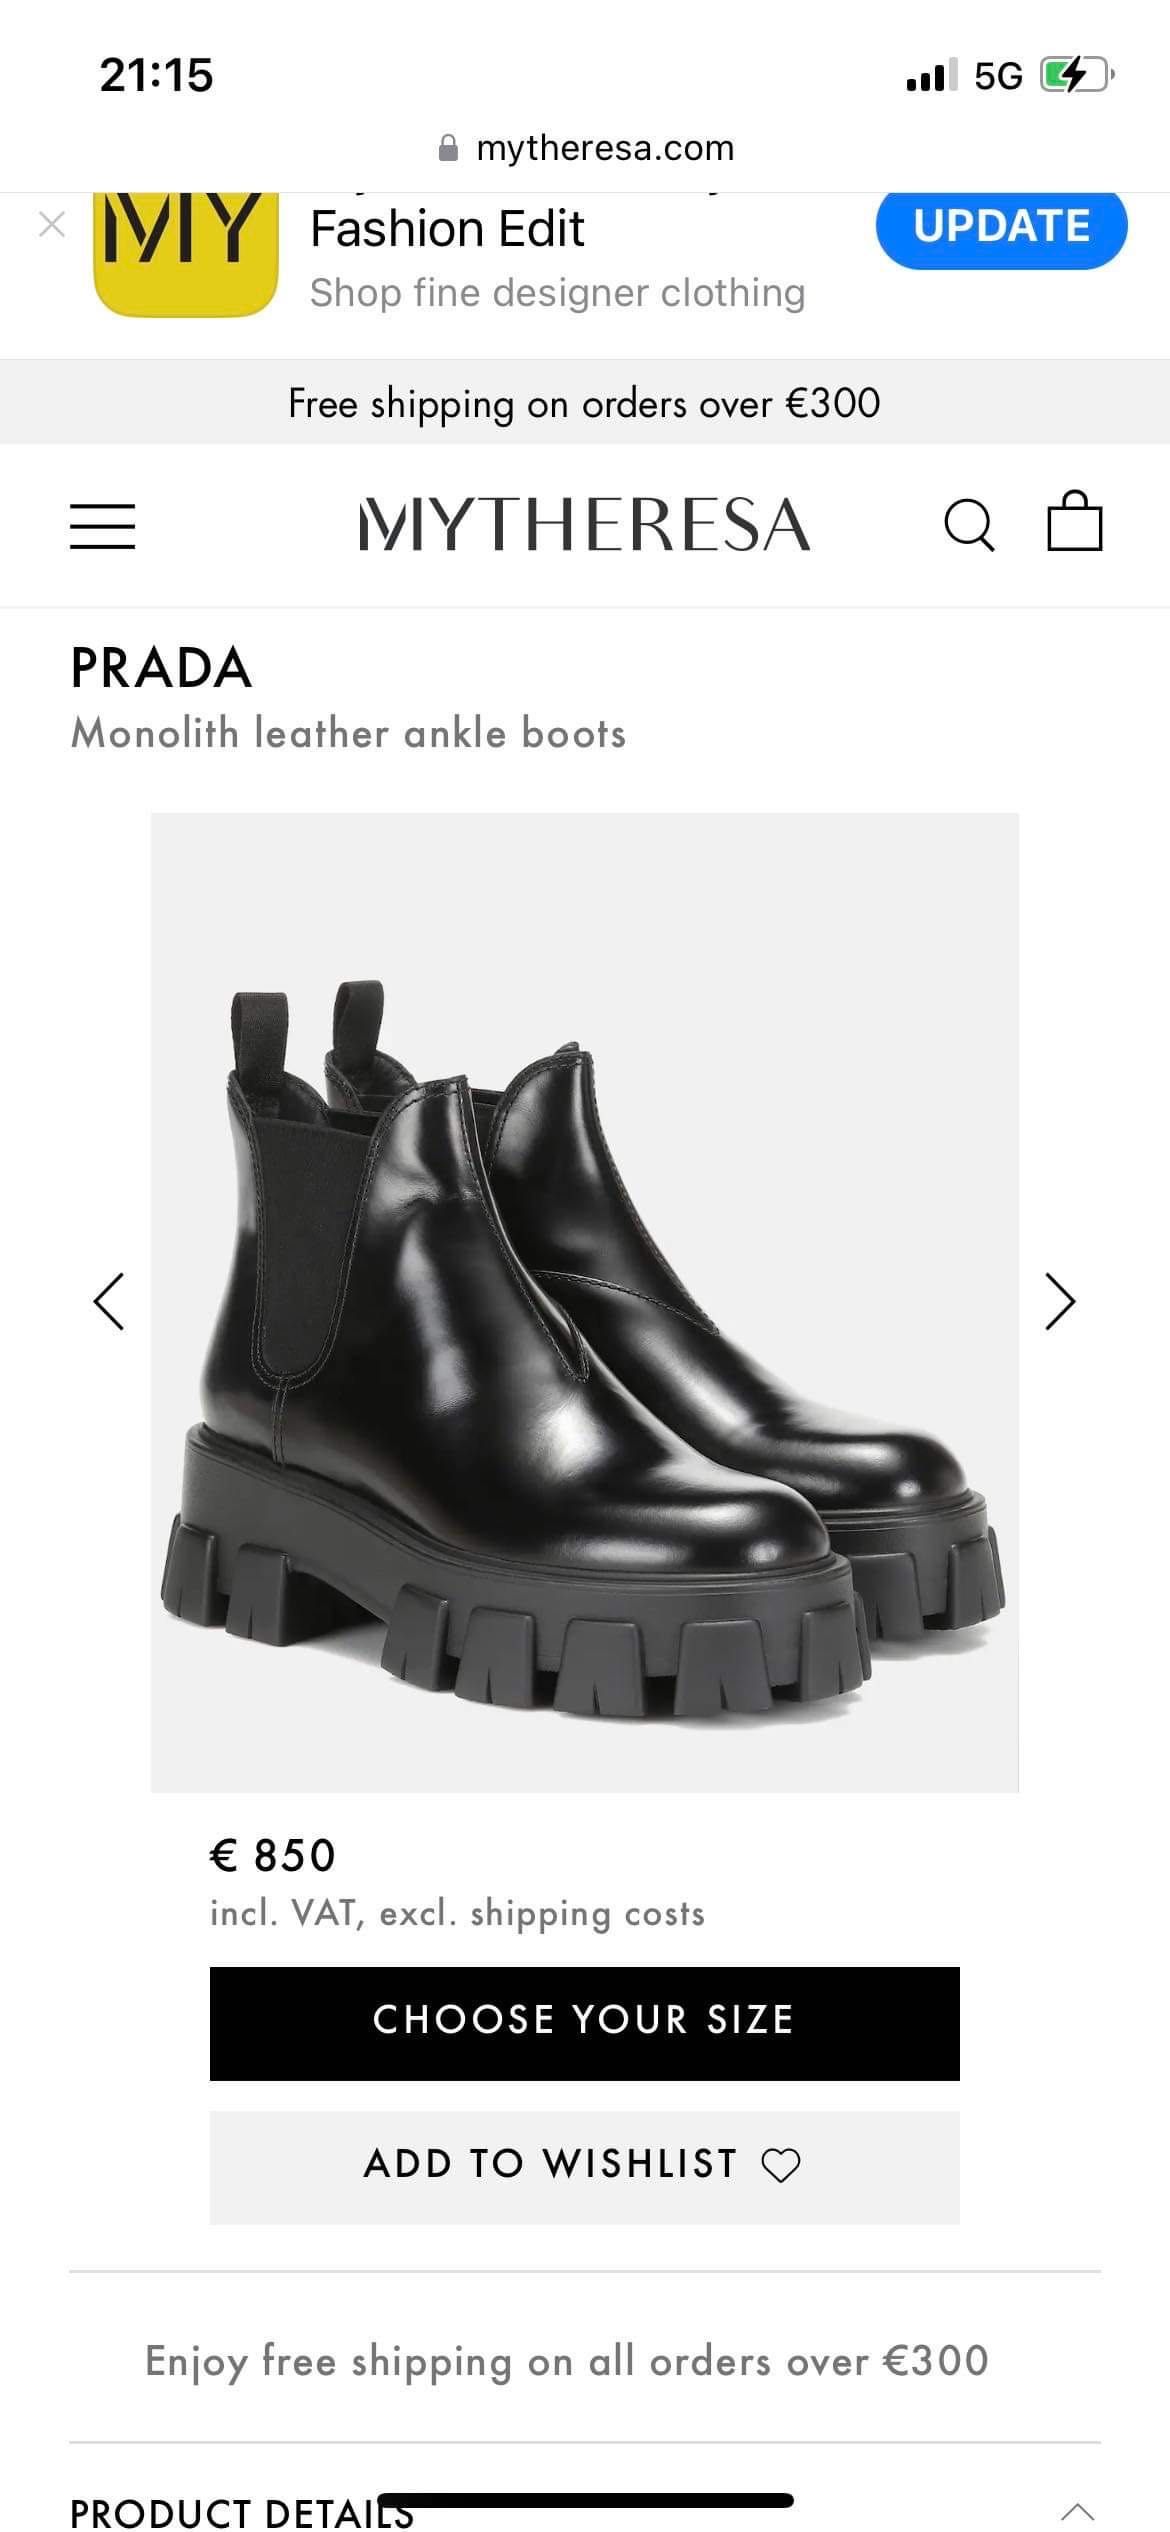 PRADA
Monolith leather ankle boots